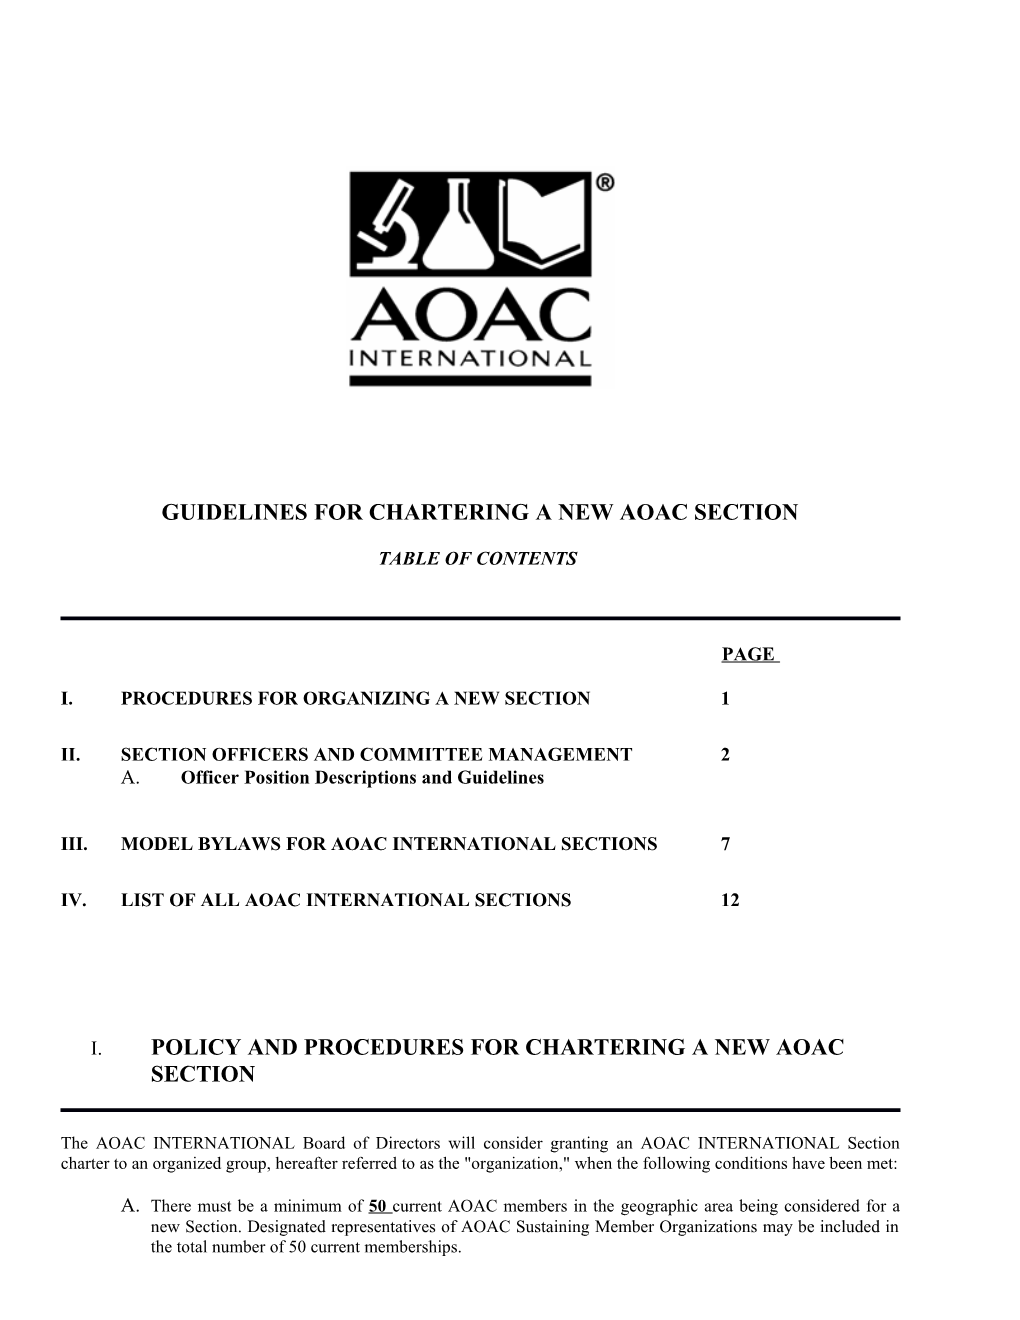 Guidelines for Chartering a New Aoac Section